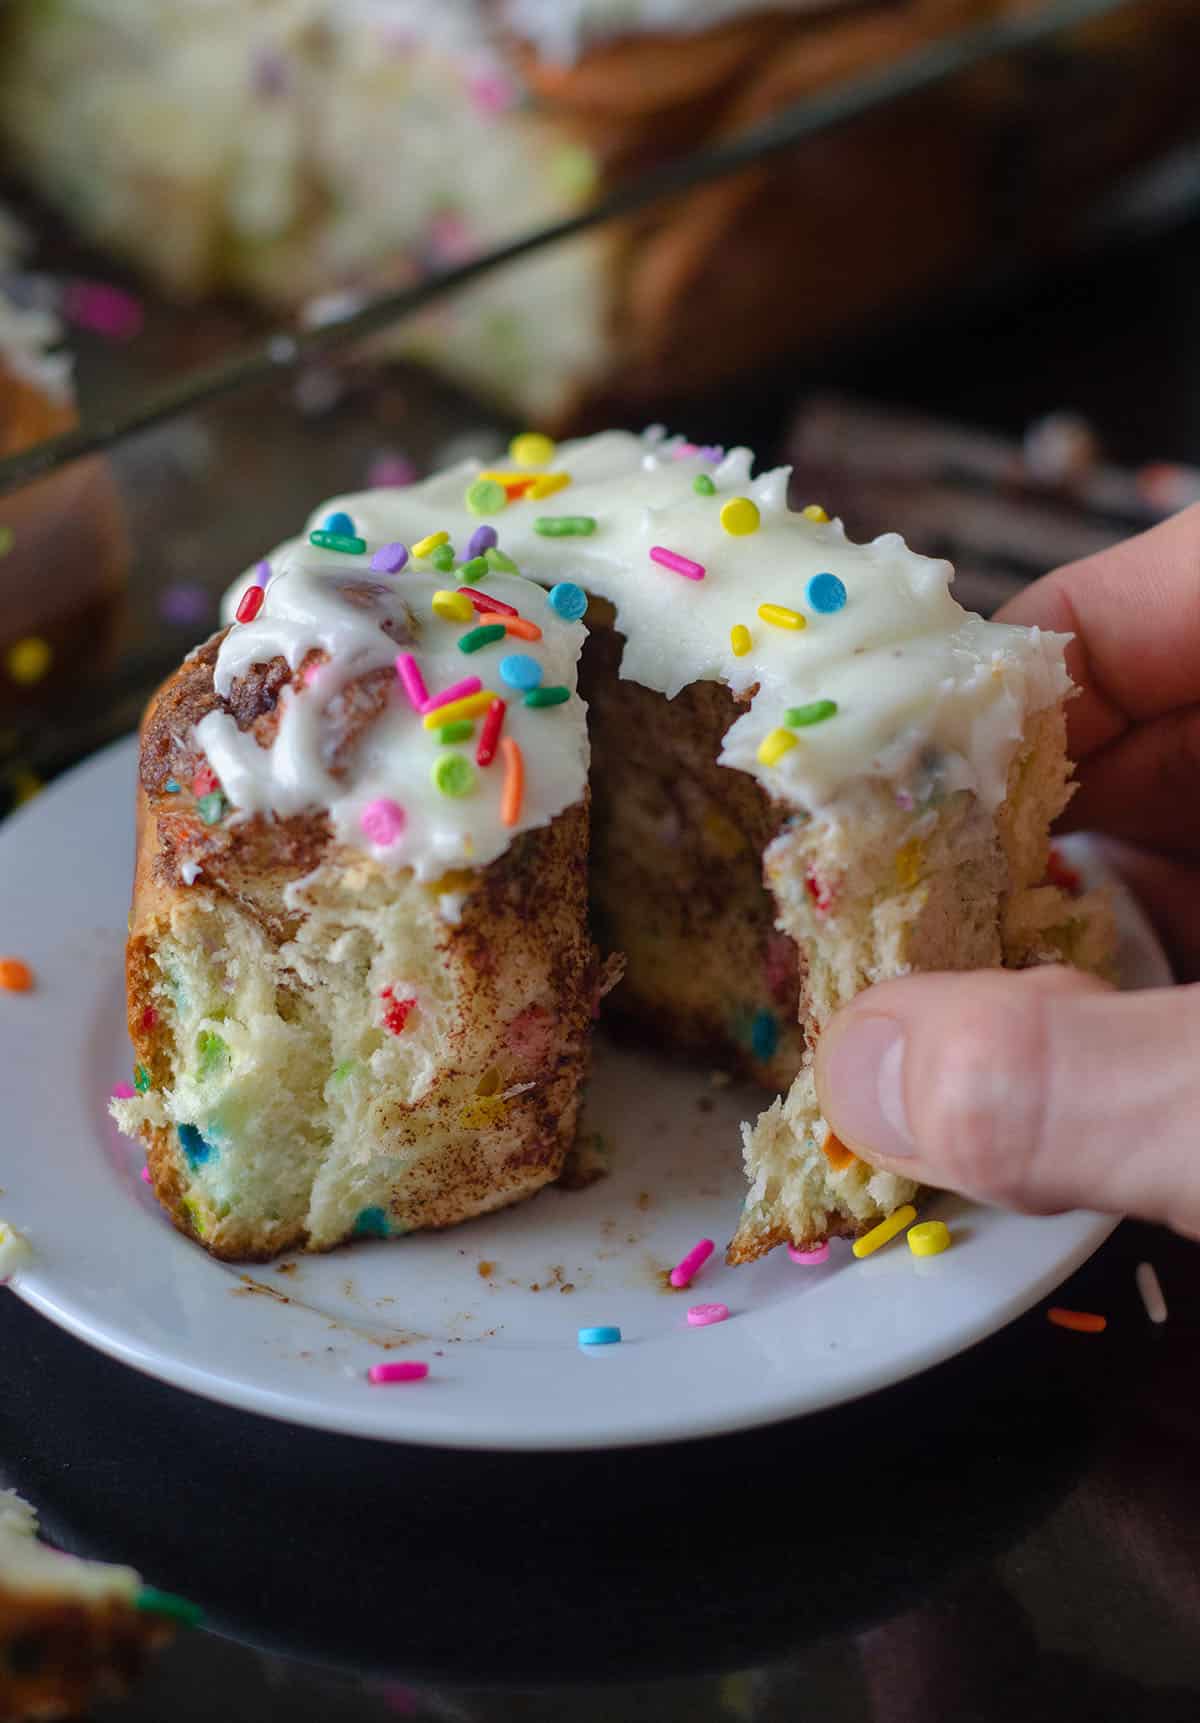 Simple yeast rolls filled with sweet and gooey cinnamon and studded with sprinkles. Spread with easy cream cheese frosting for an indulgent breakfast or treat! via @frshaprilflours